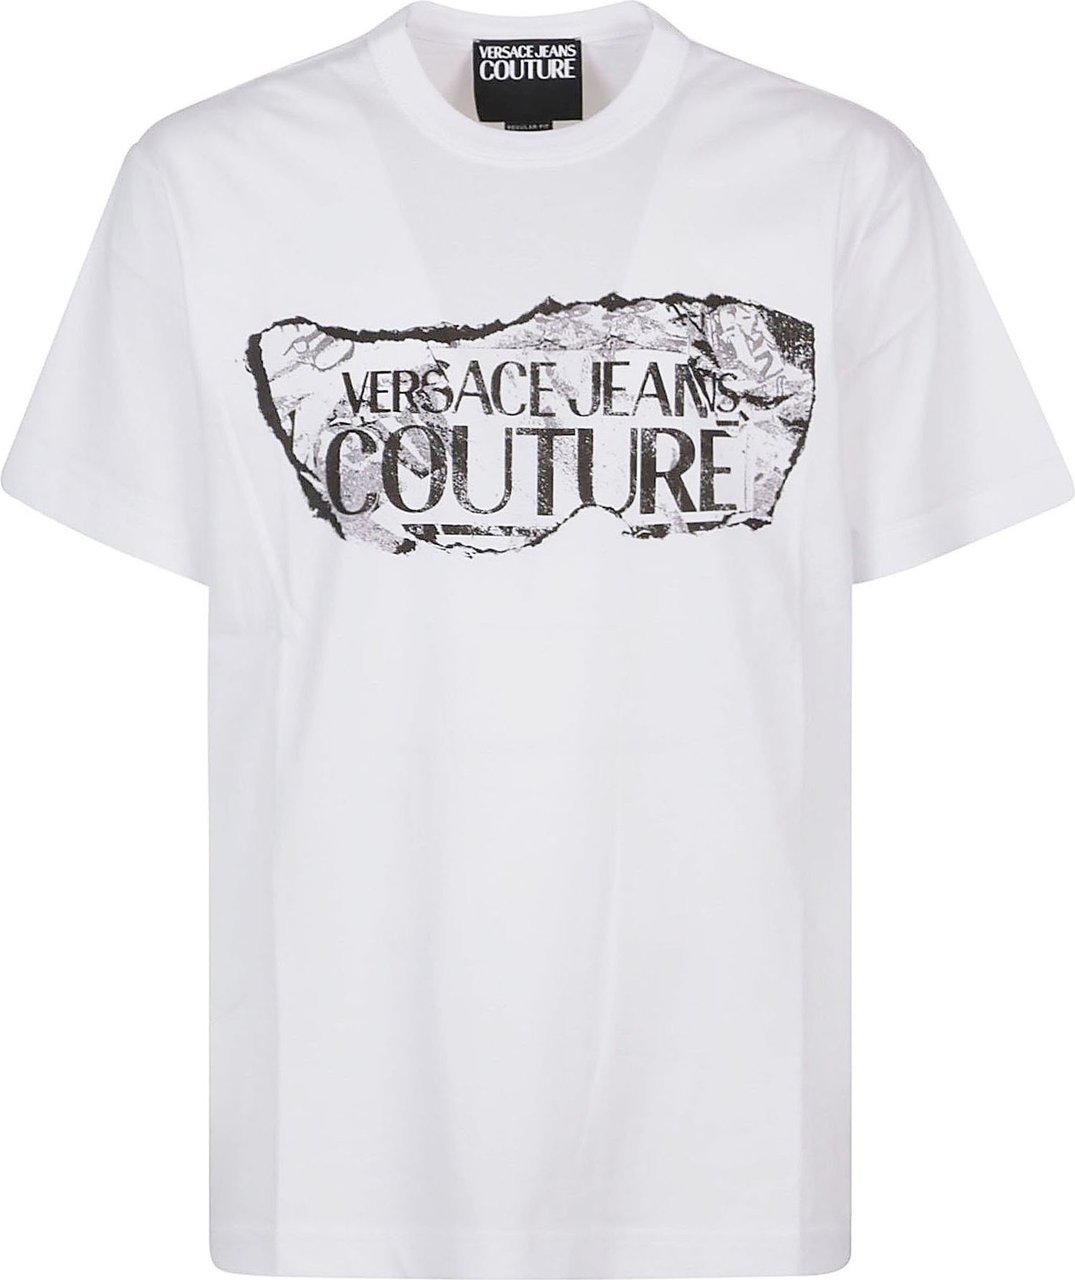 Versace Jeans Couture Versace Couture Heren T-shirt Wit 76GAHE03-CJ00E/003 Wit